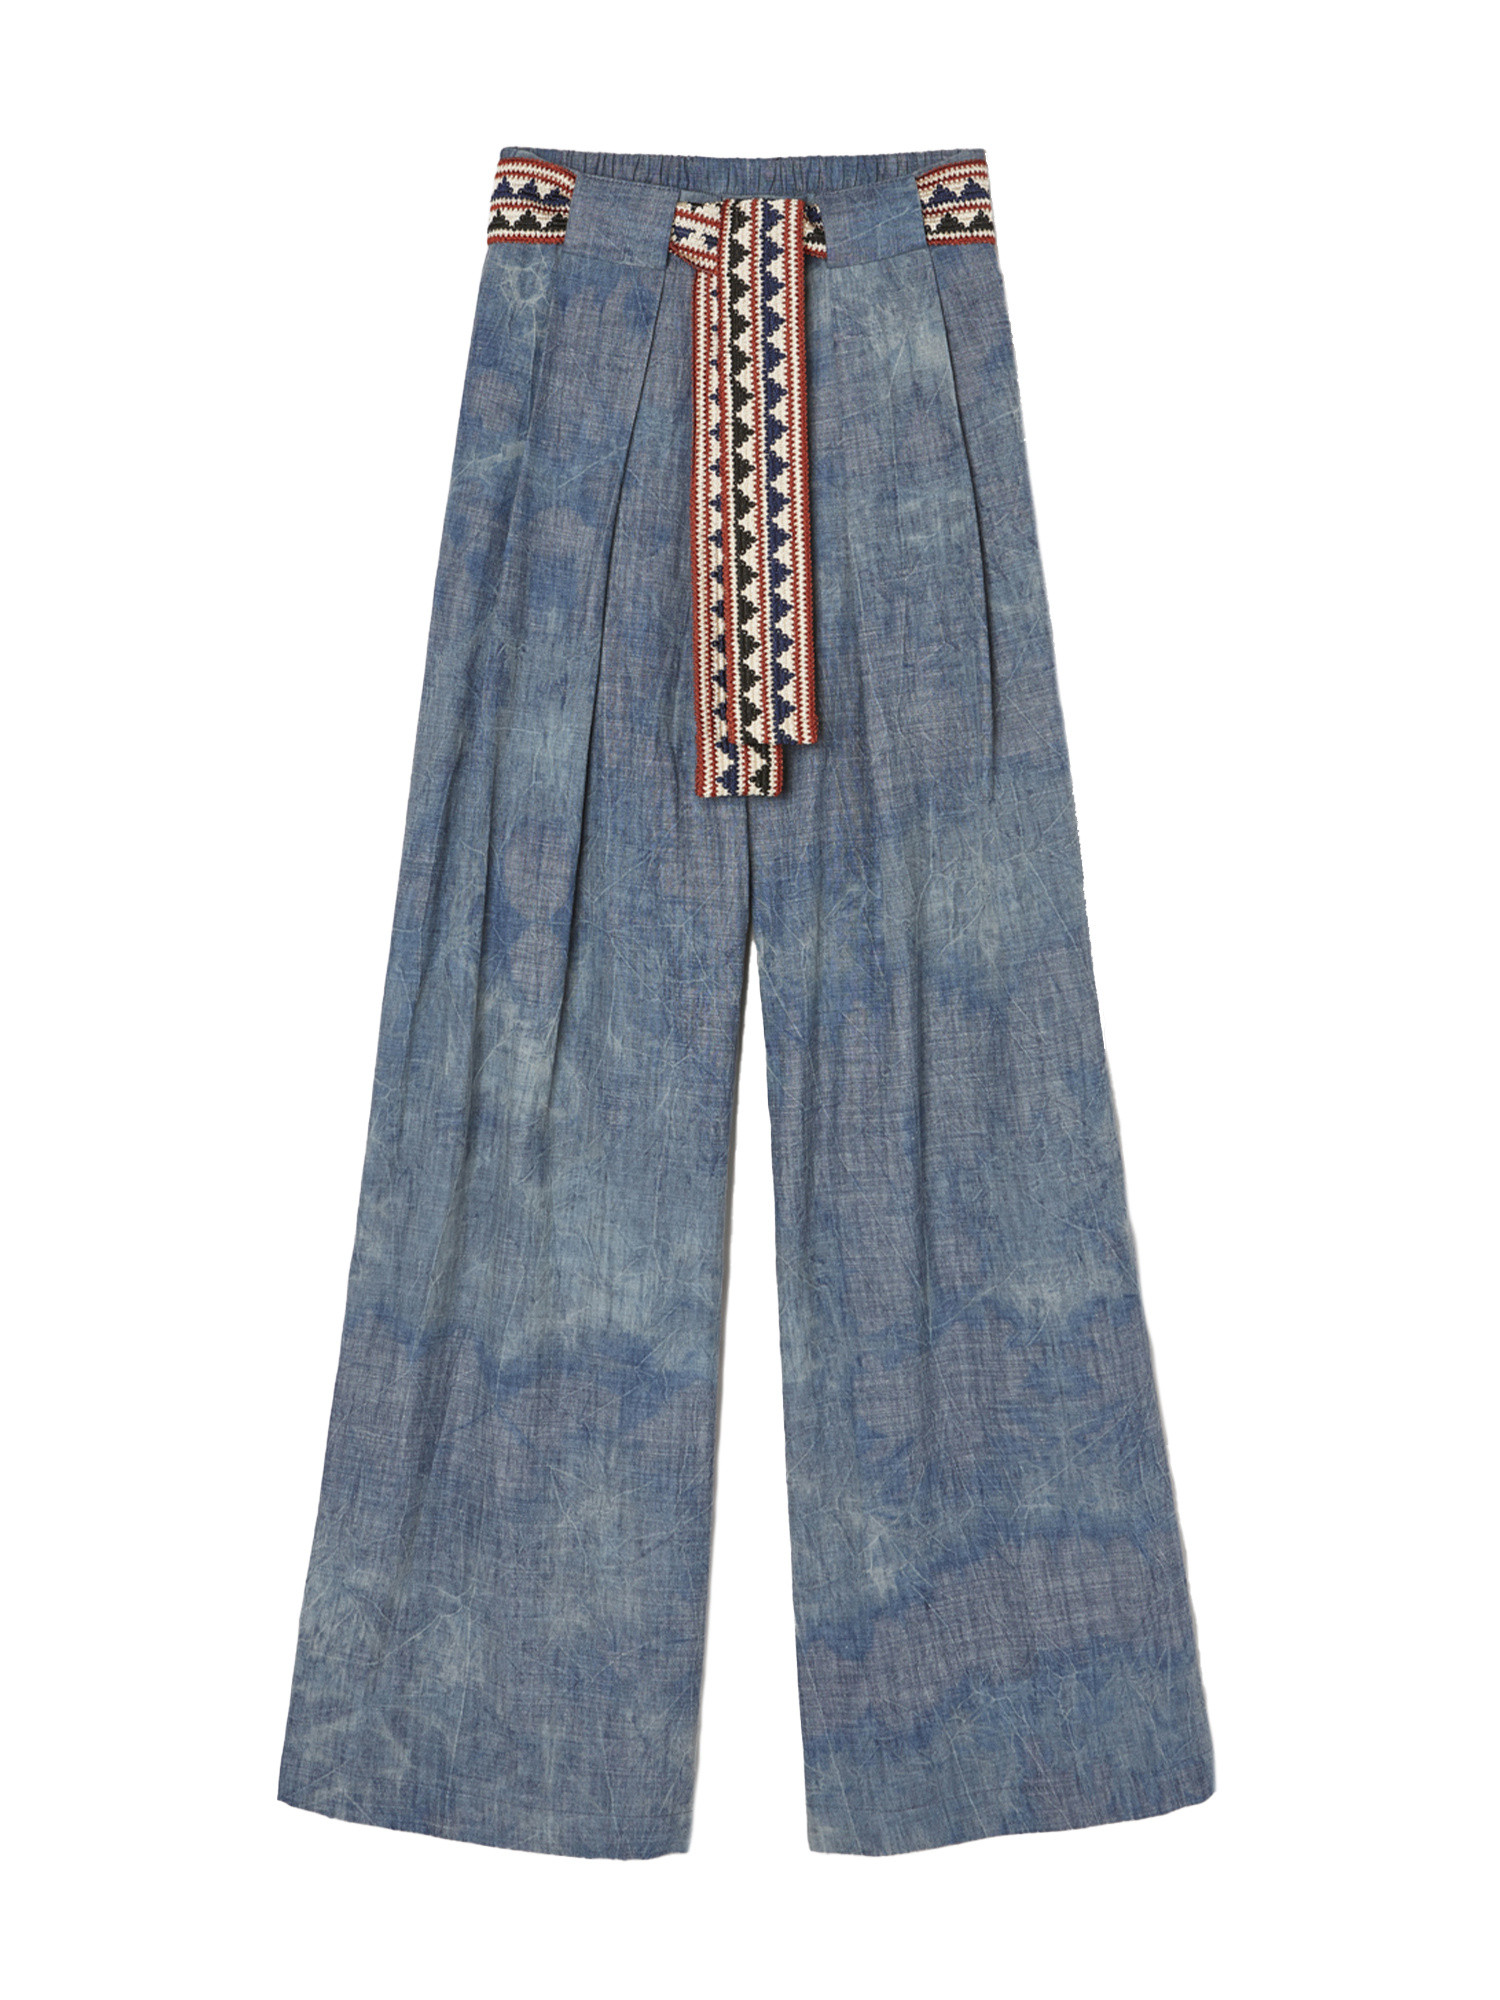 Momonì - Leona pants in tie dyed chambray, Denim, large image number 0